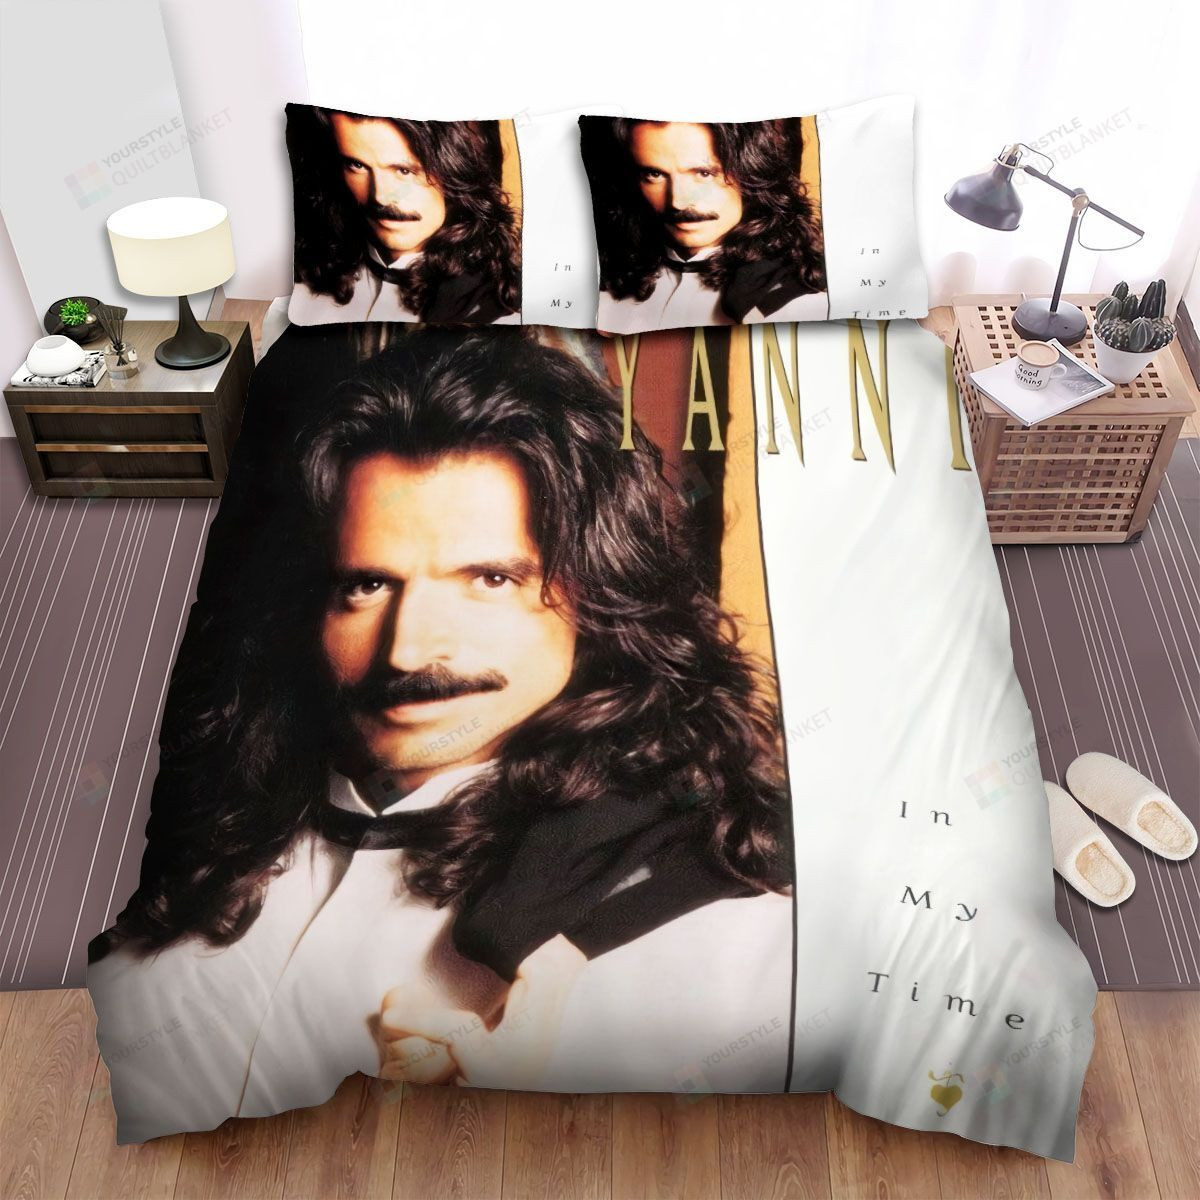 Yanni In My Time Album Cover Bed Sheets Spread Comforter Duvet Cover Bedding Sets